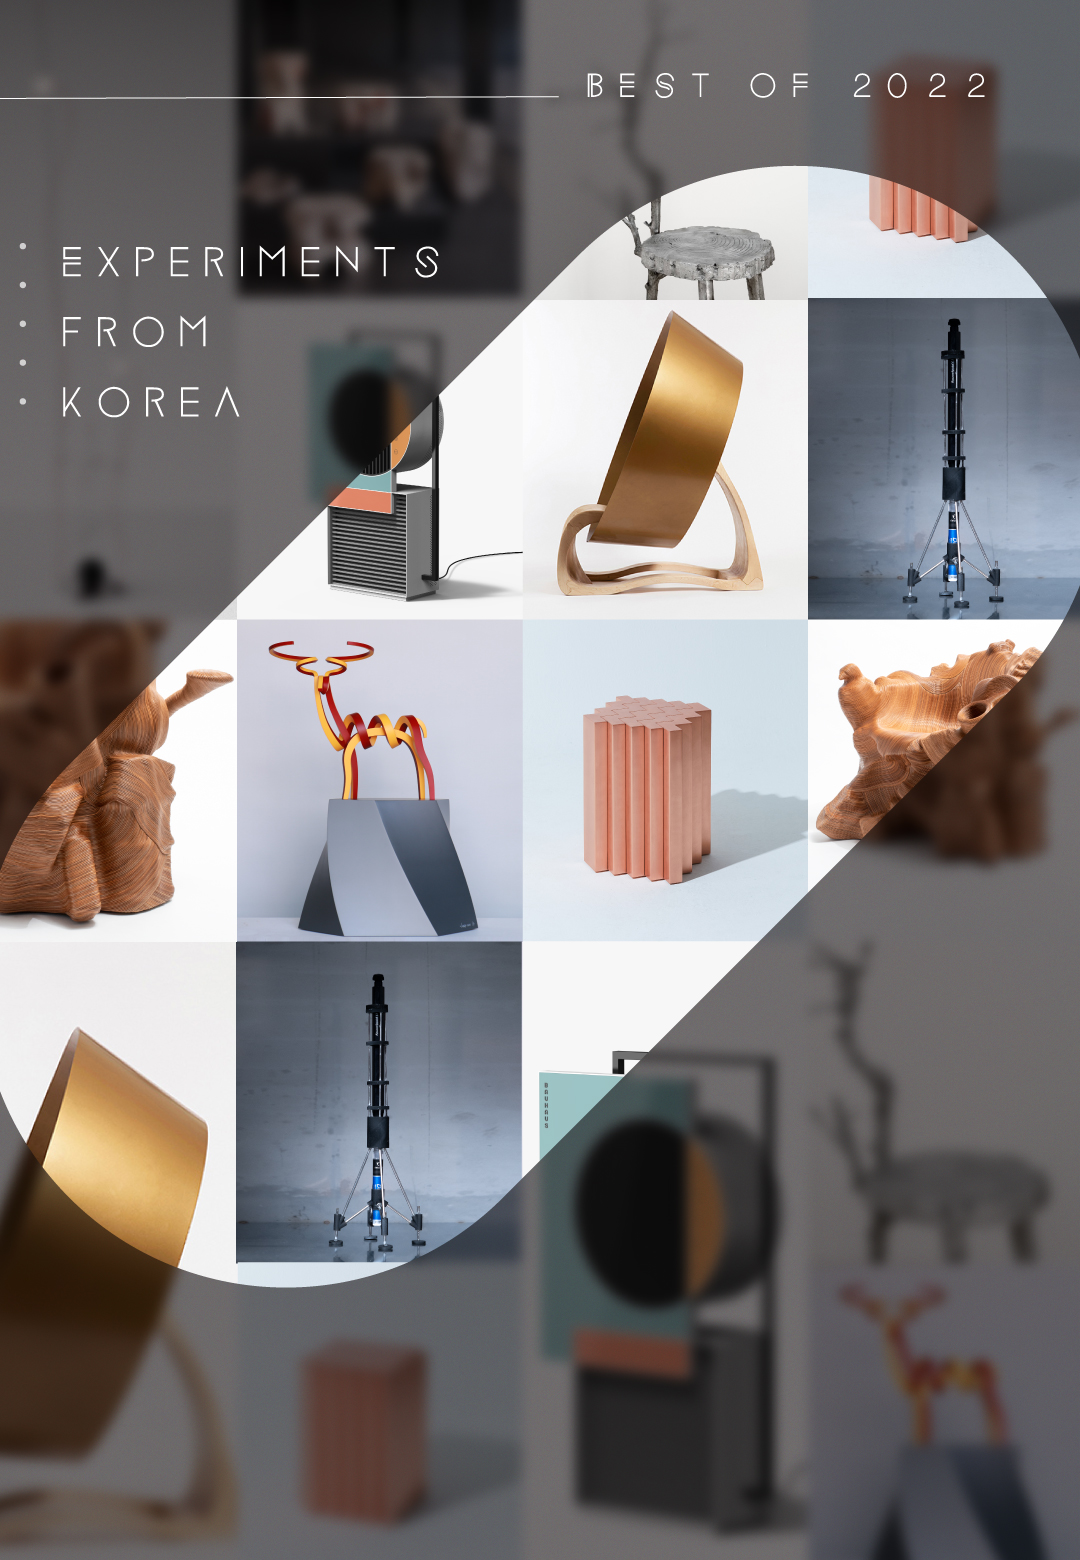 Experiments from Korea: A series of art and design works from 2022